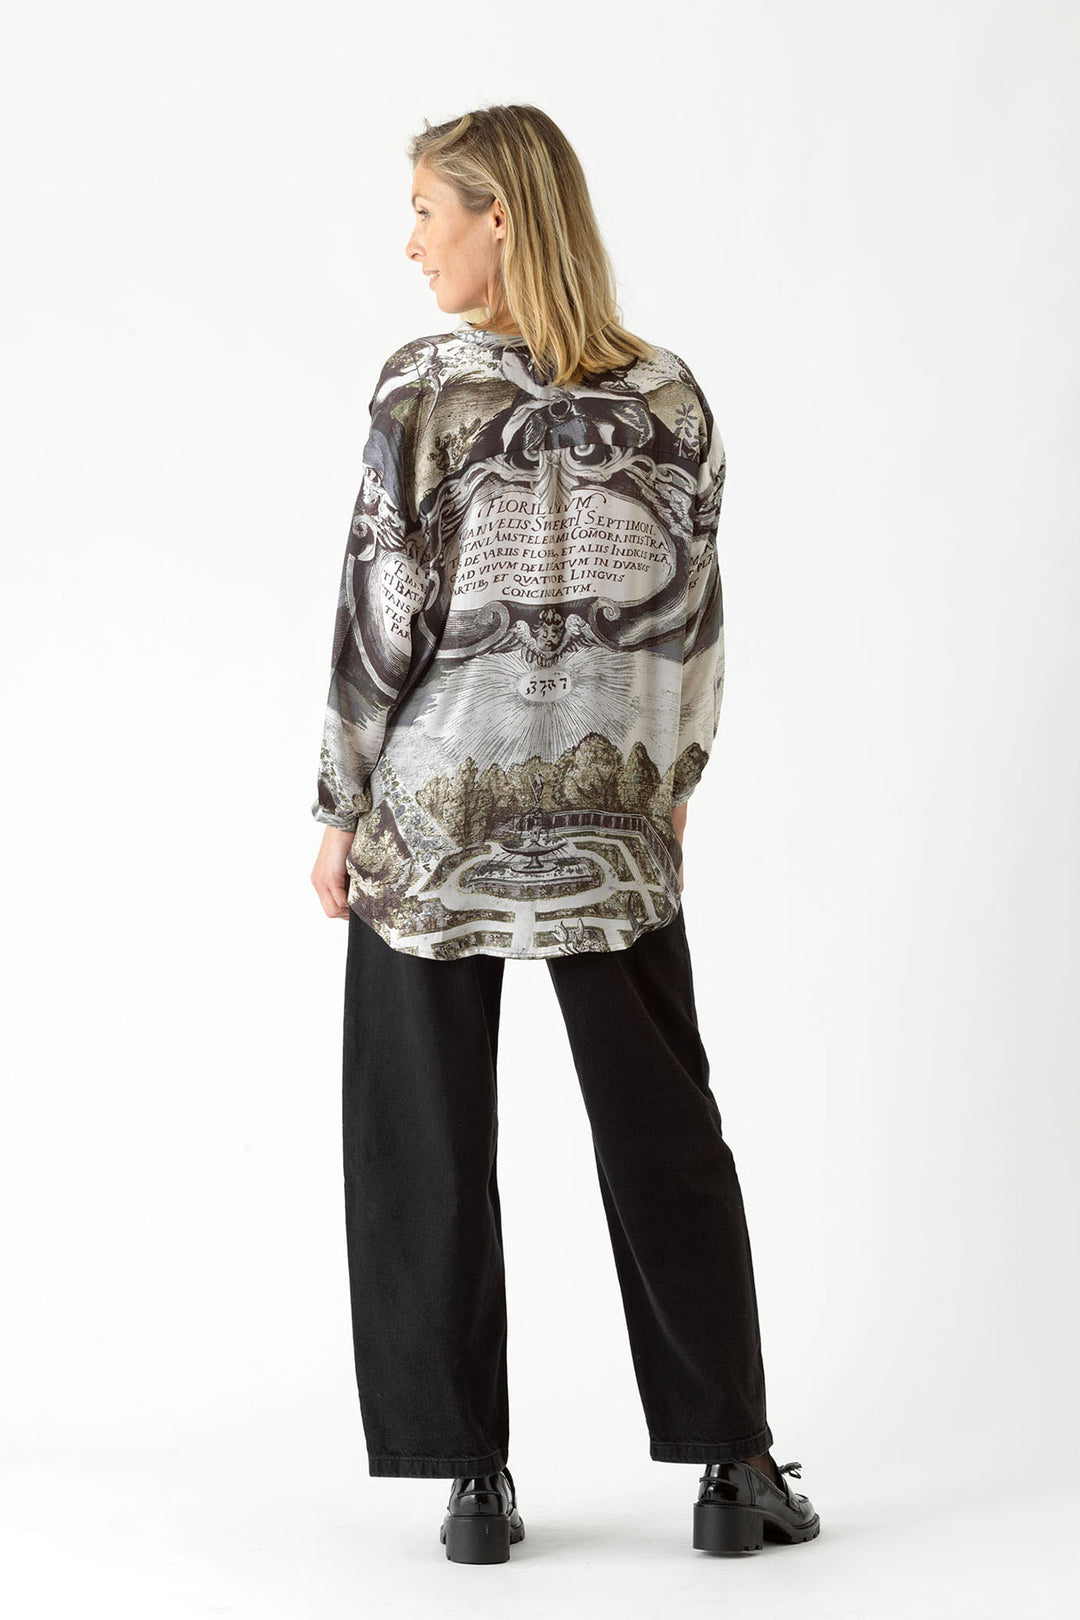 ladies long sleeve satin shirt coloured in tones of black, grey and subtle green print by One Hundred Stars